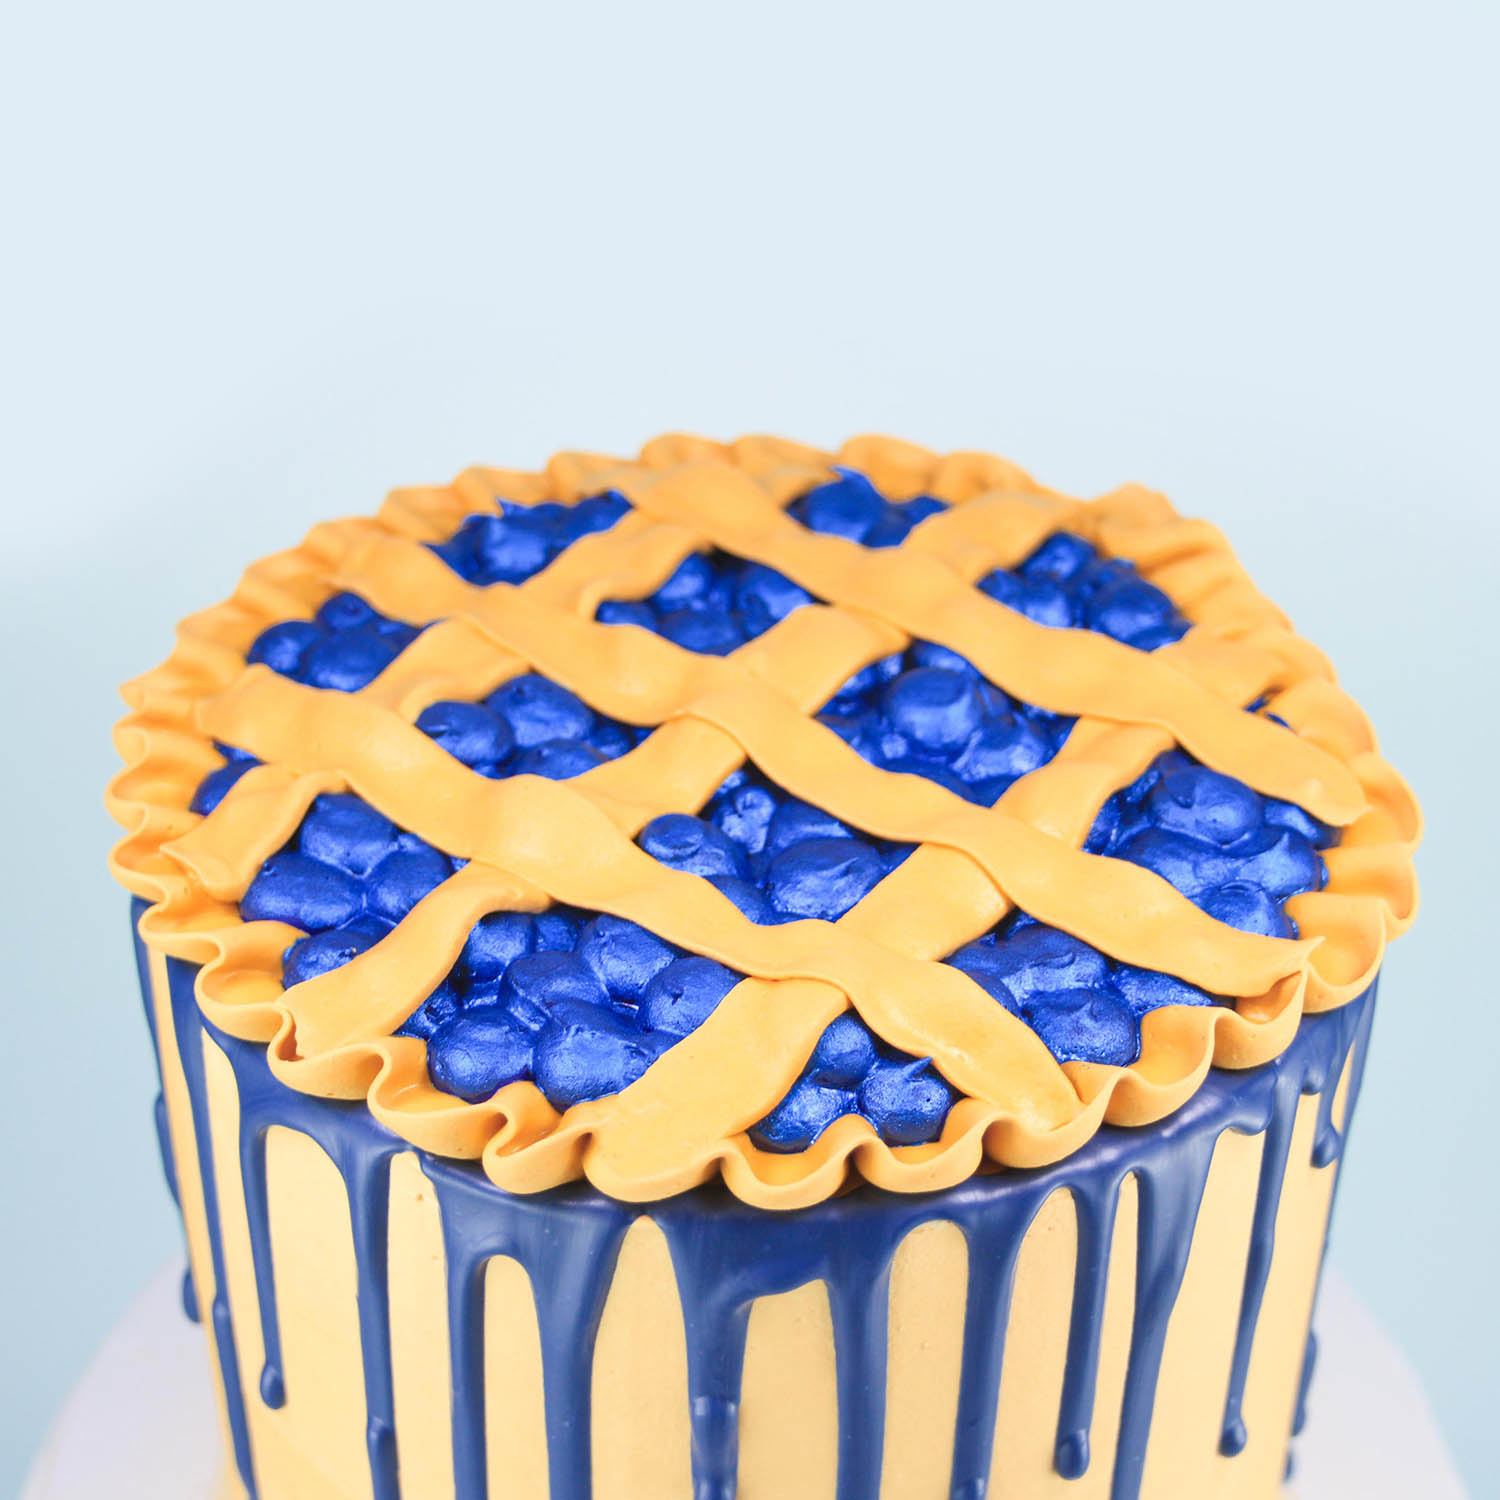 Top of cake decorate like a real blueberry pie